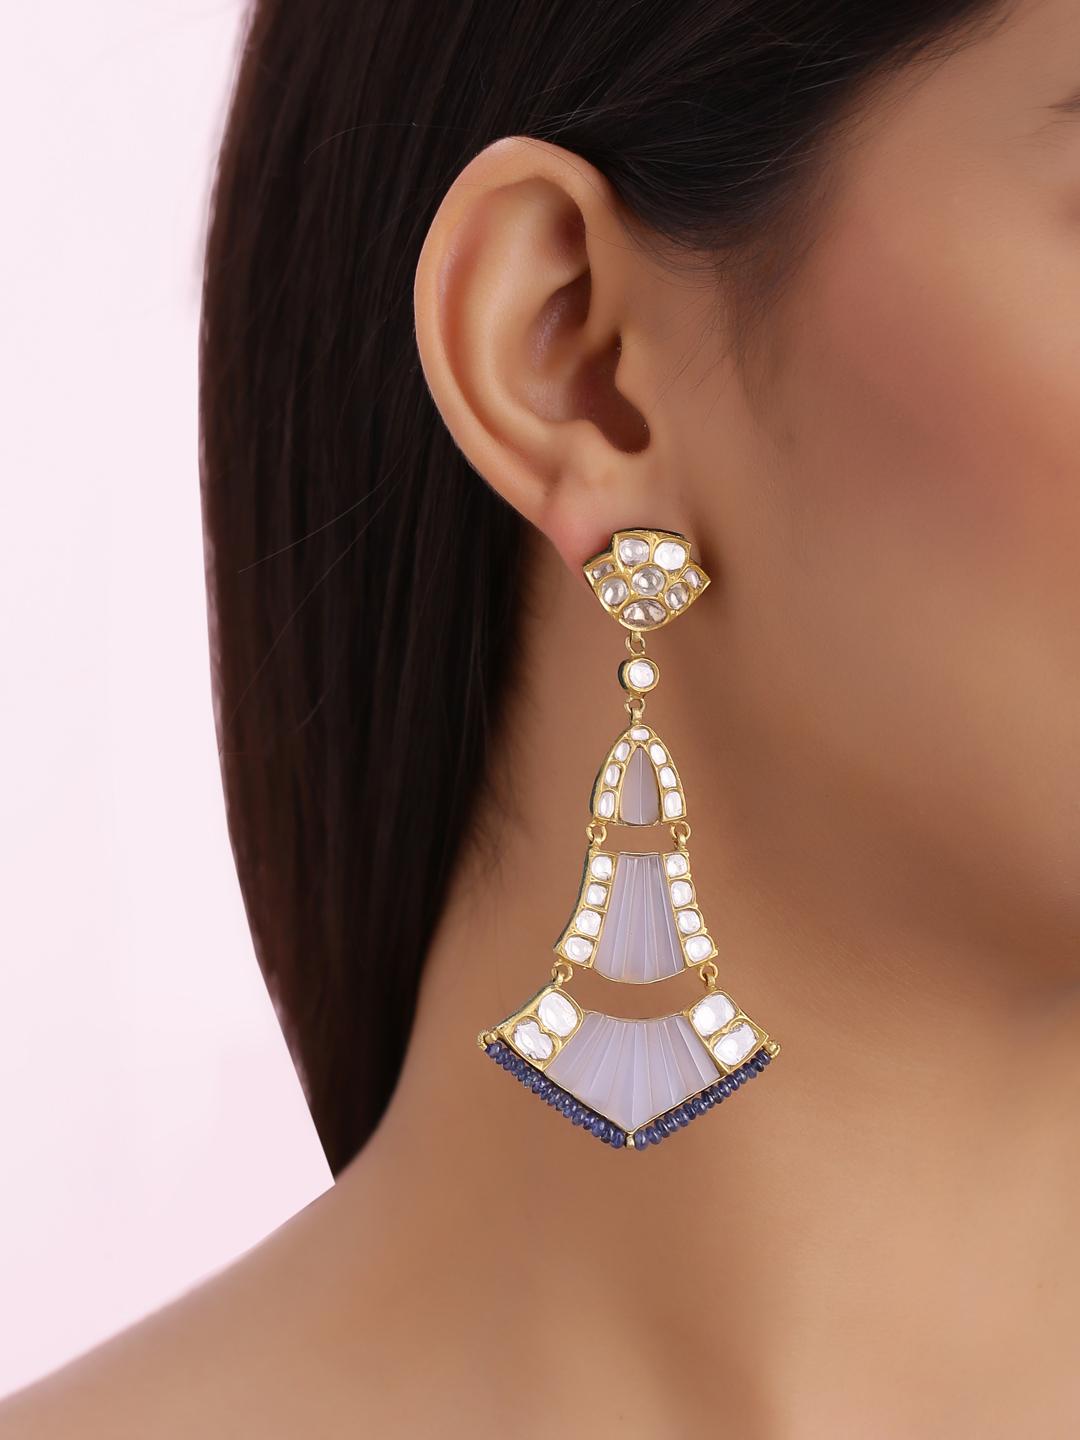 18k Gold Chandelier Earrings with Diamonds, Carved Chalcedony and Sapphire Beads In New Condition For Sale In Jaipur, IN